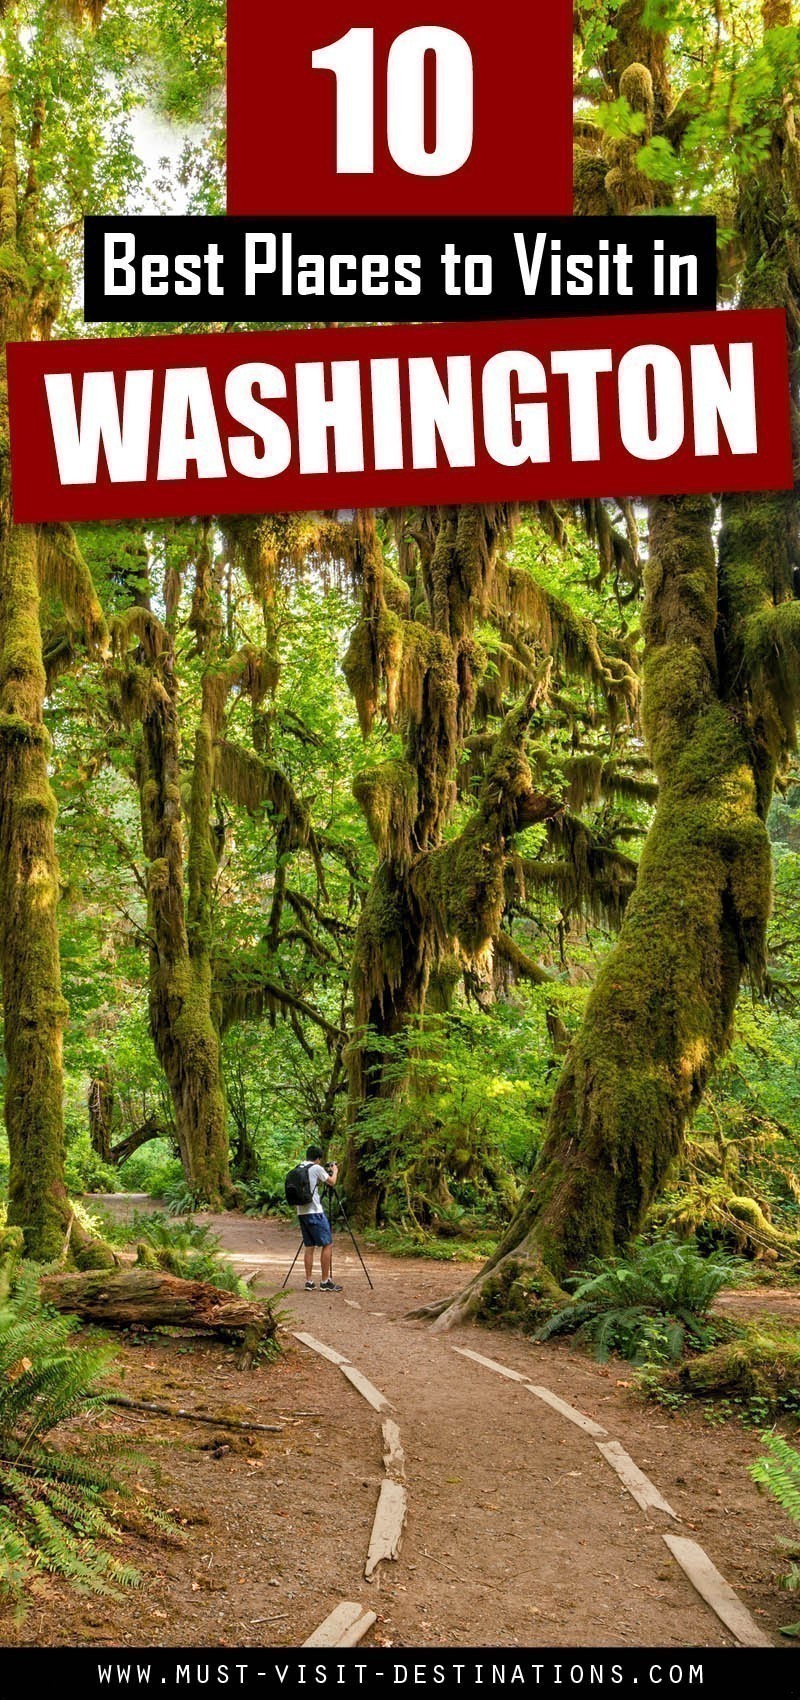 Discover the most popular tourist attractions to visit in Washington. Here is an overview of the TOP 10 Best Places to Visit in Washington. #travel